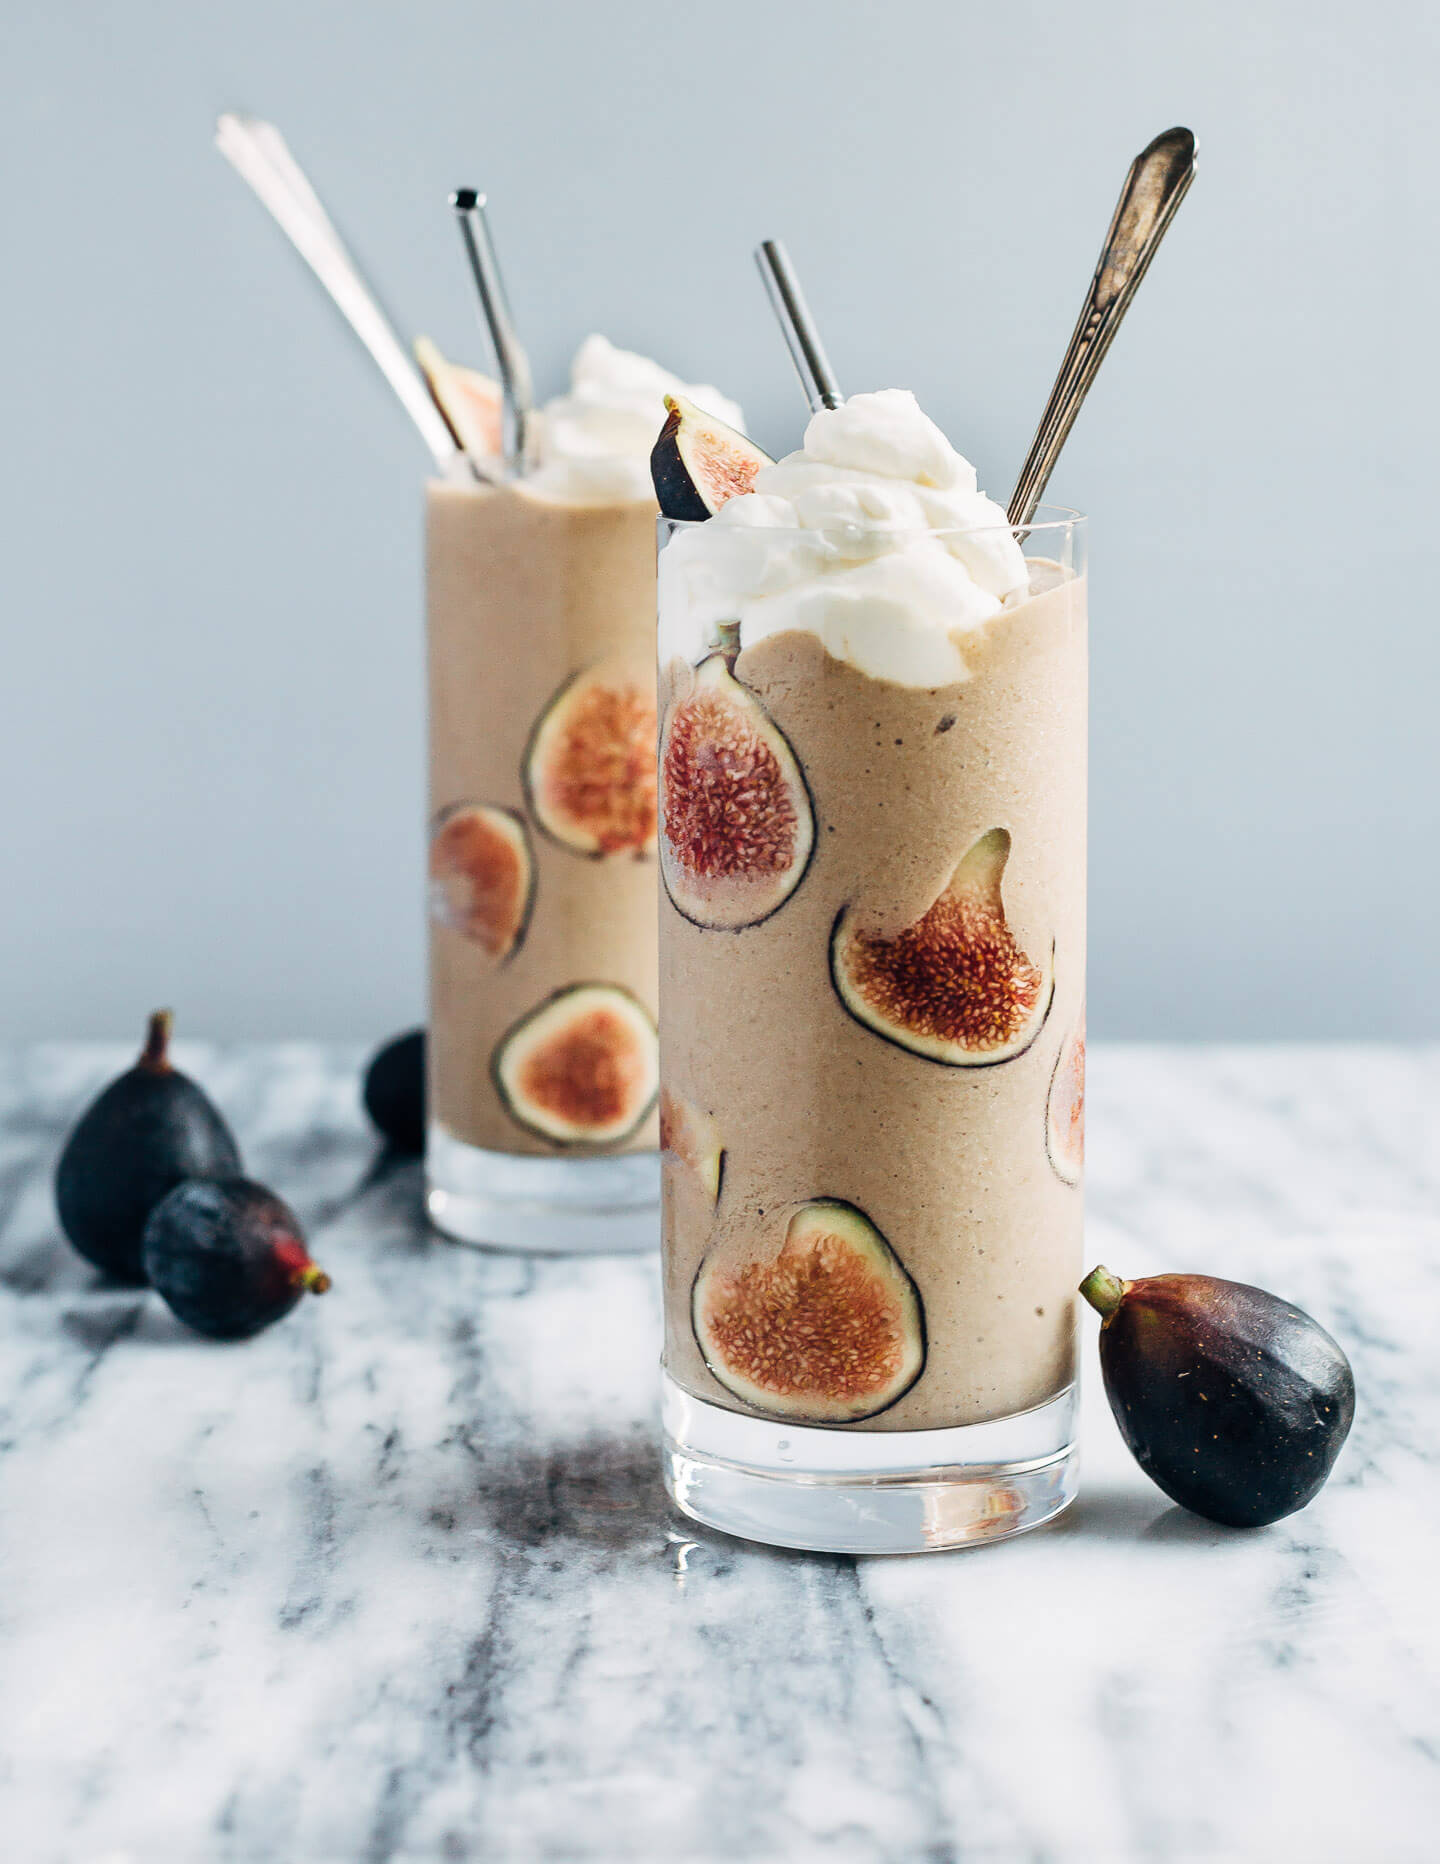 Made with concentrated cold brew coffee, black Mission figs, and vanilla ice cream, these boozy milkshakes make for a quick, sophisticated dessert. 